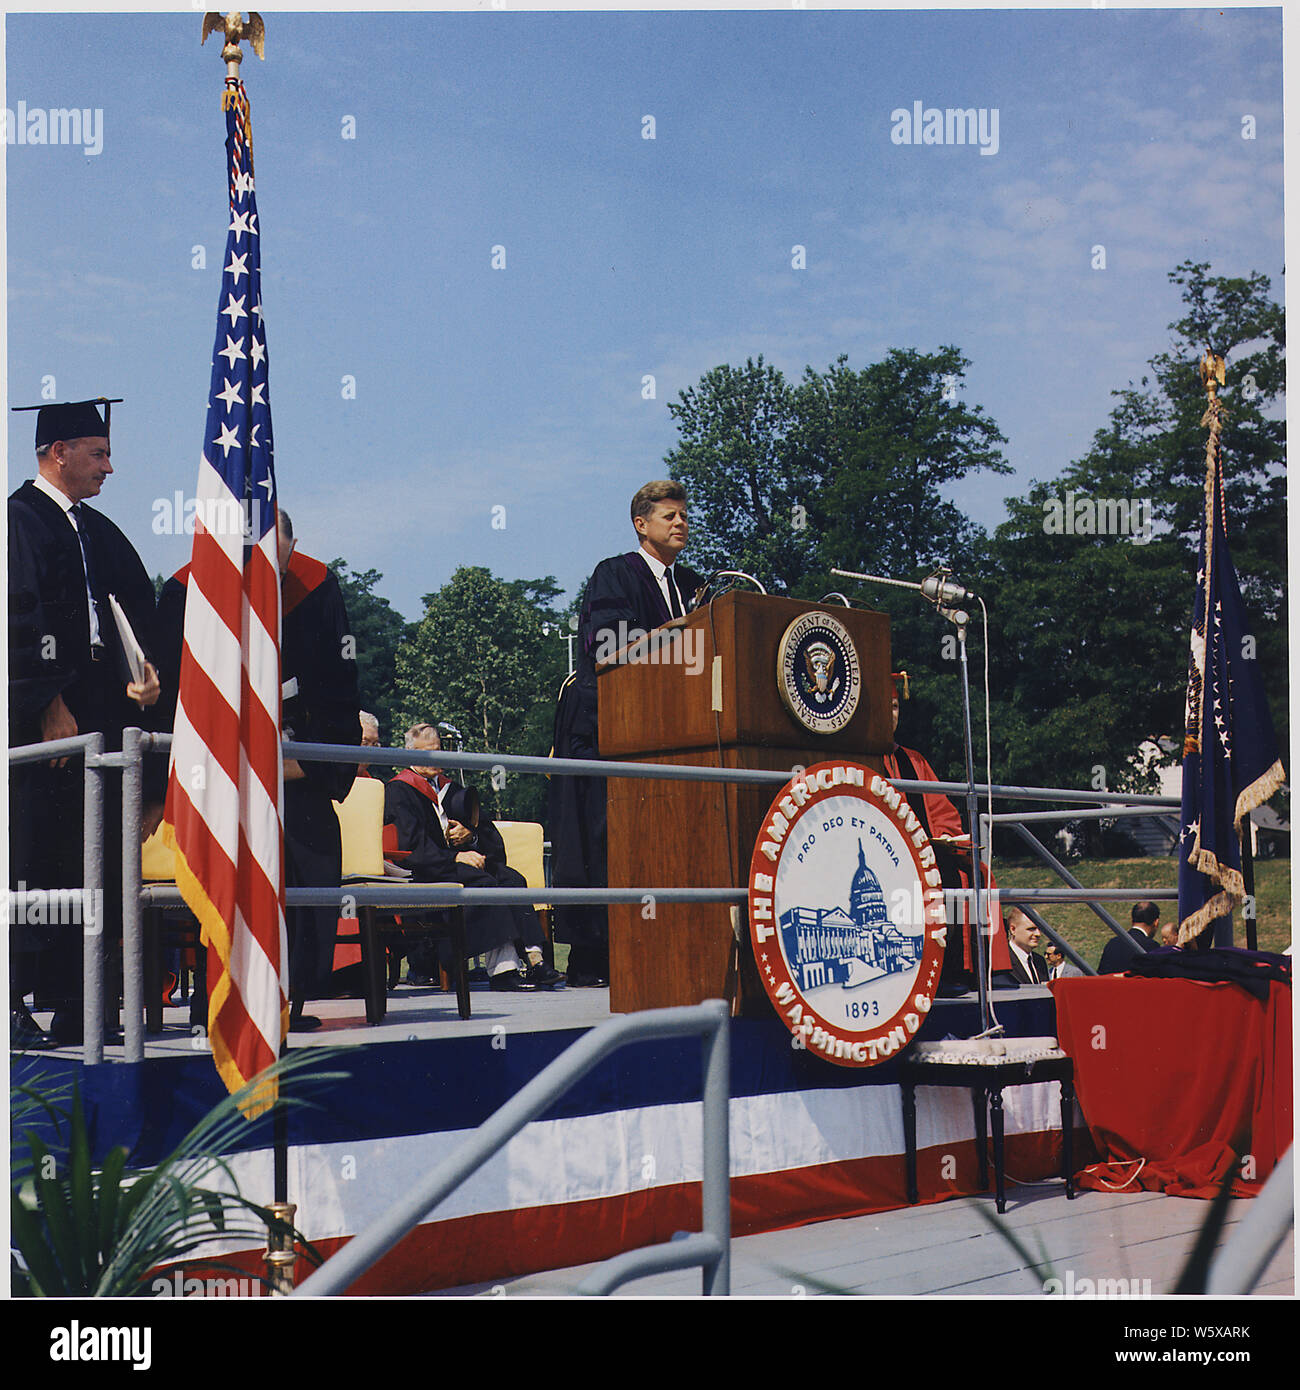 President addresses American University Commencement, recieves honorary degree. President Kennedy at Podium, speaker's platform guests. Washington, D.C., American University, John M. Reeves Athletic Field. Stock Photo